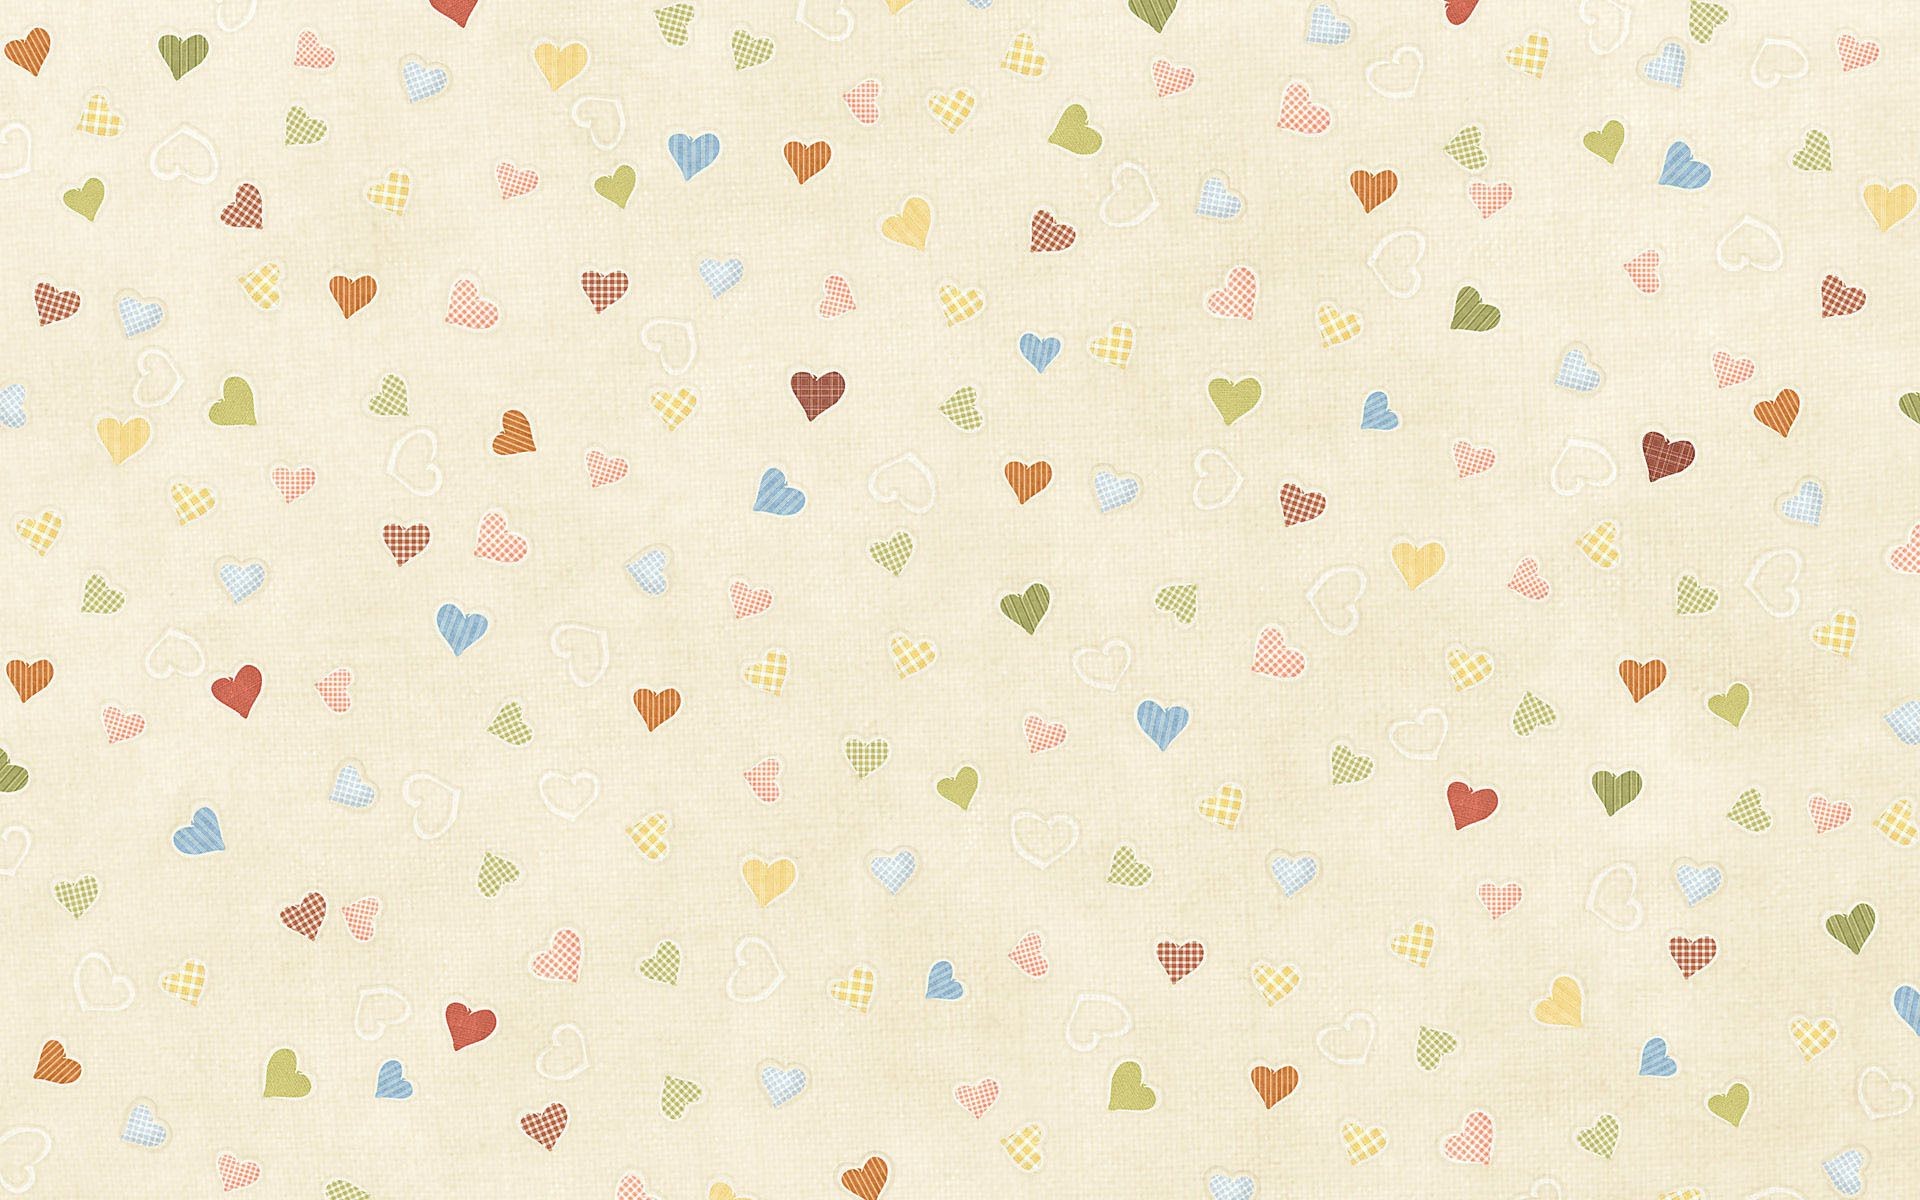 hearts pattern wallpaper repetition illustration seamless vector retro design abstract fabric texture textile decoration paper polka desktop background square art graphic